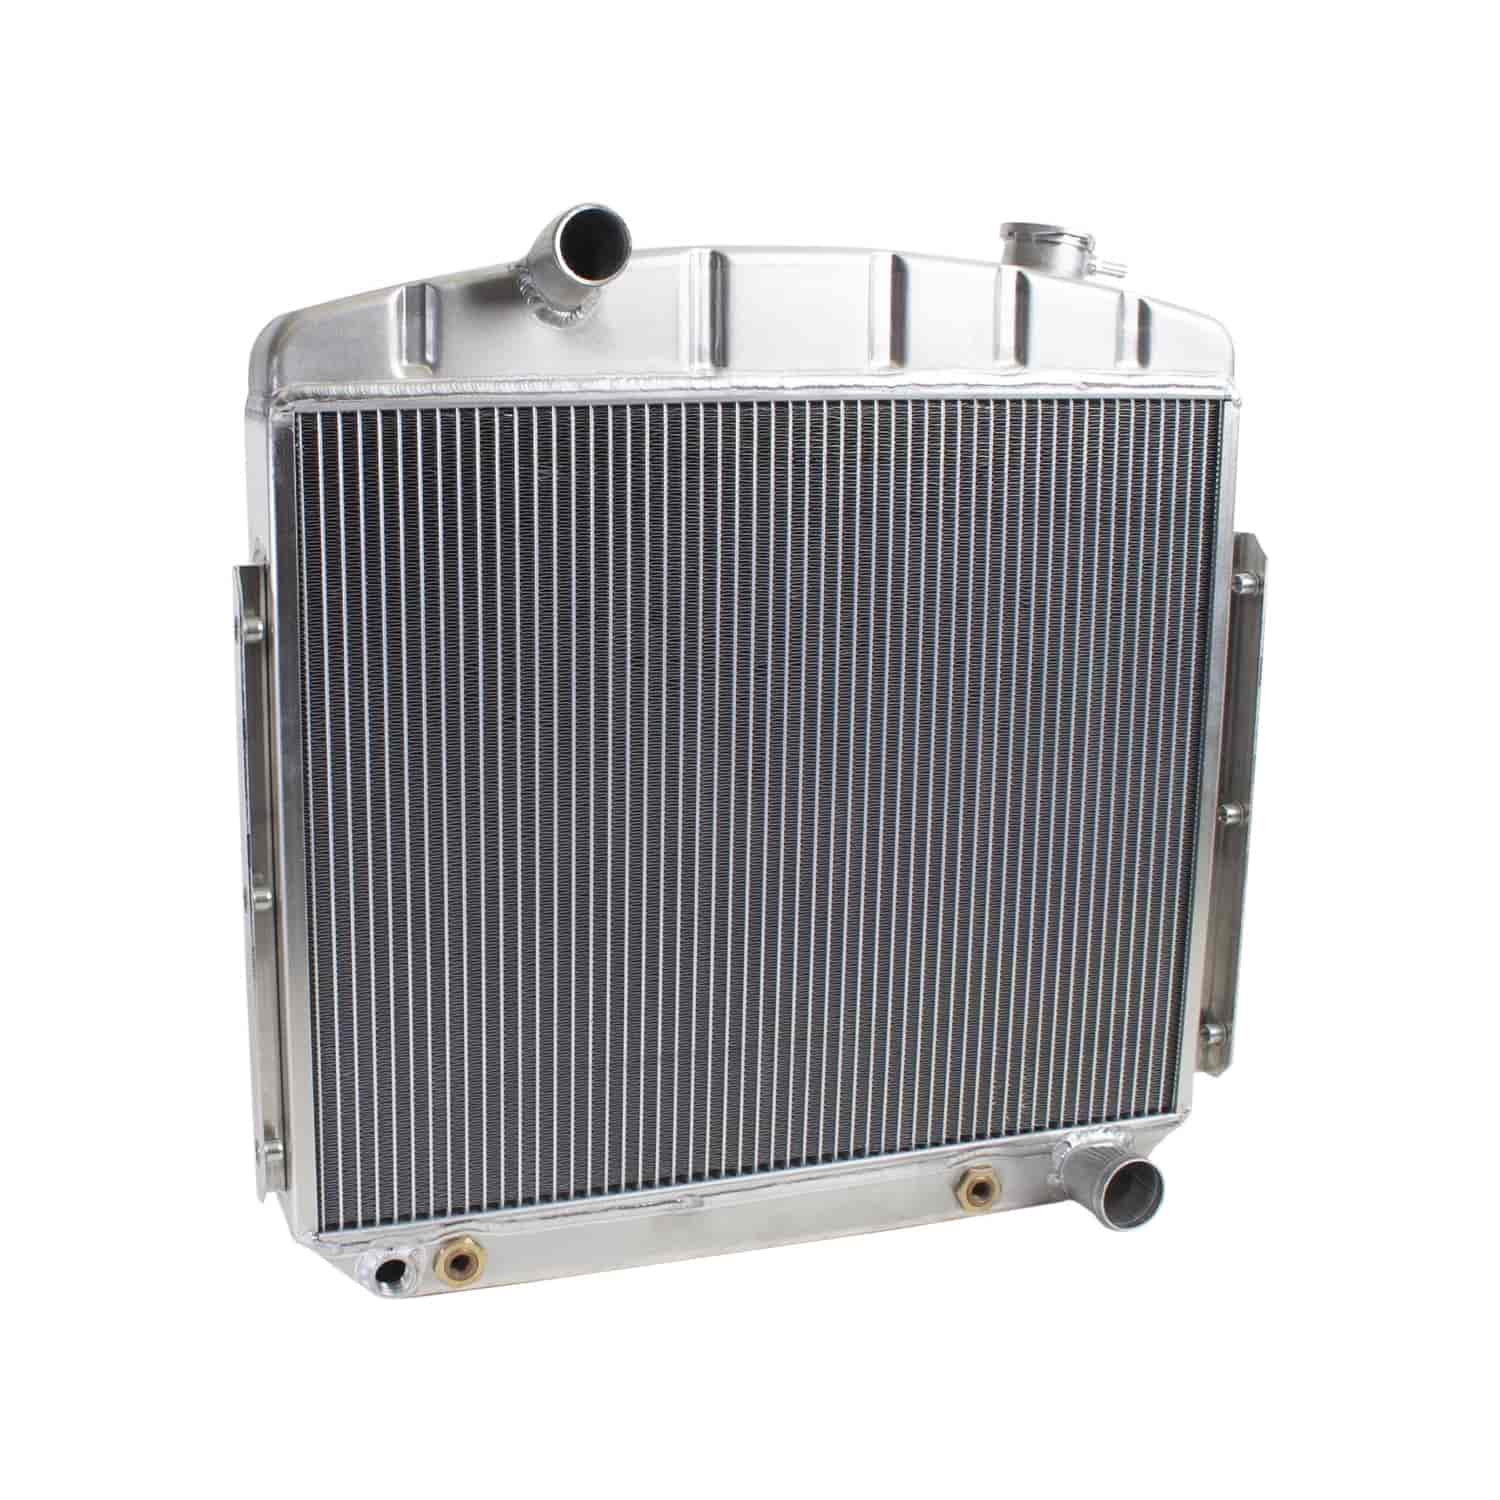 ExactFit Radiator for 1957 Chevrolet Car for Chevy L6 Mount with Transmission Cooler